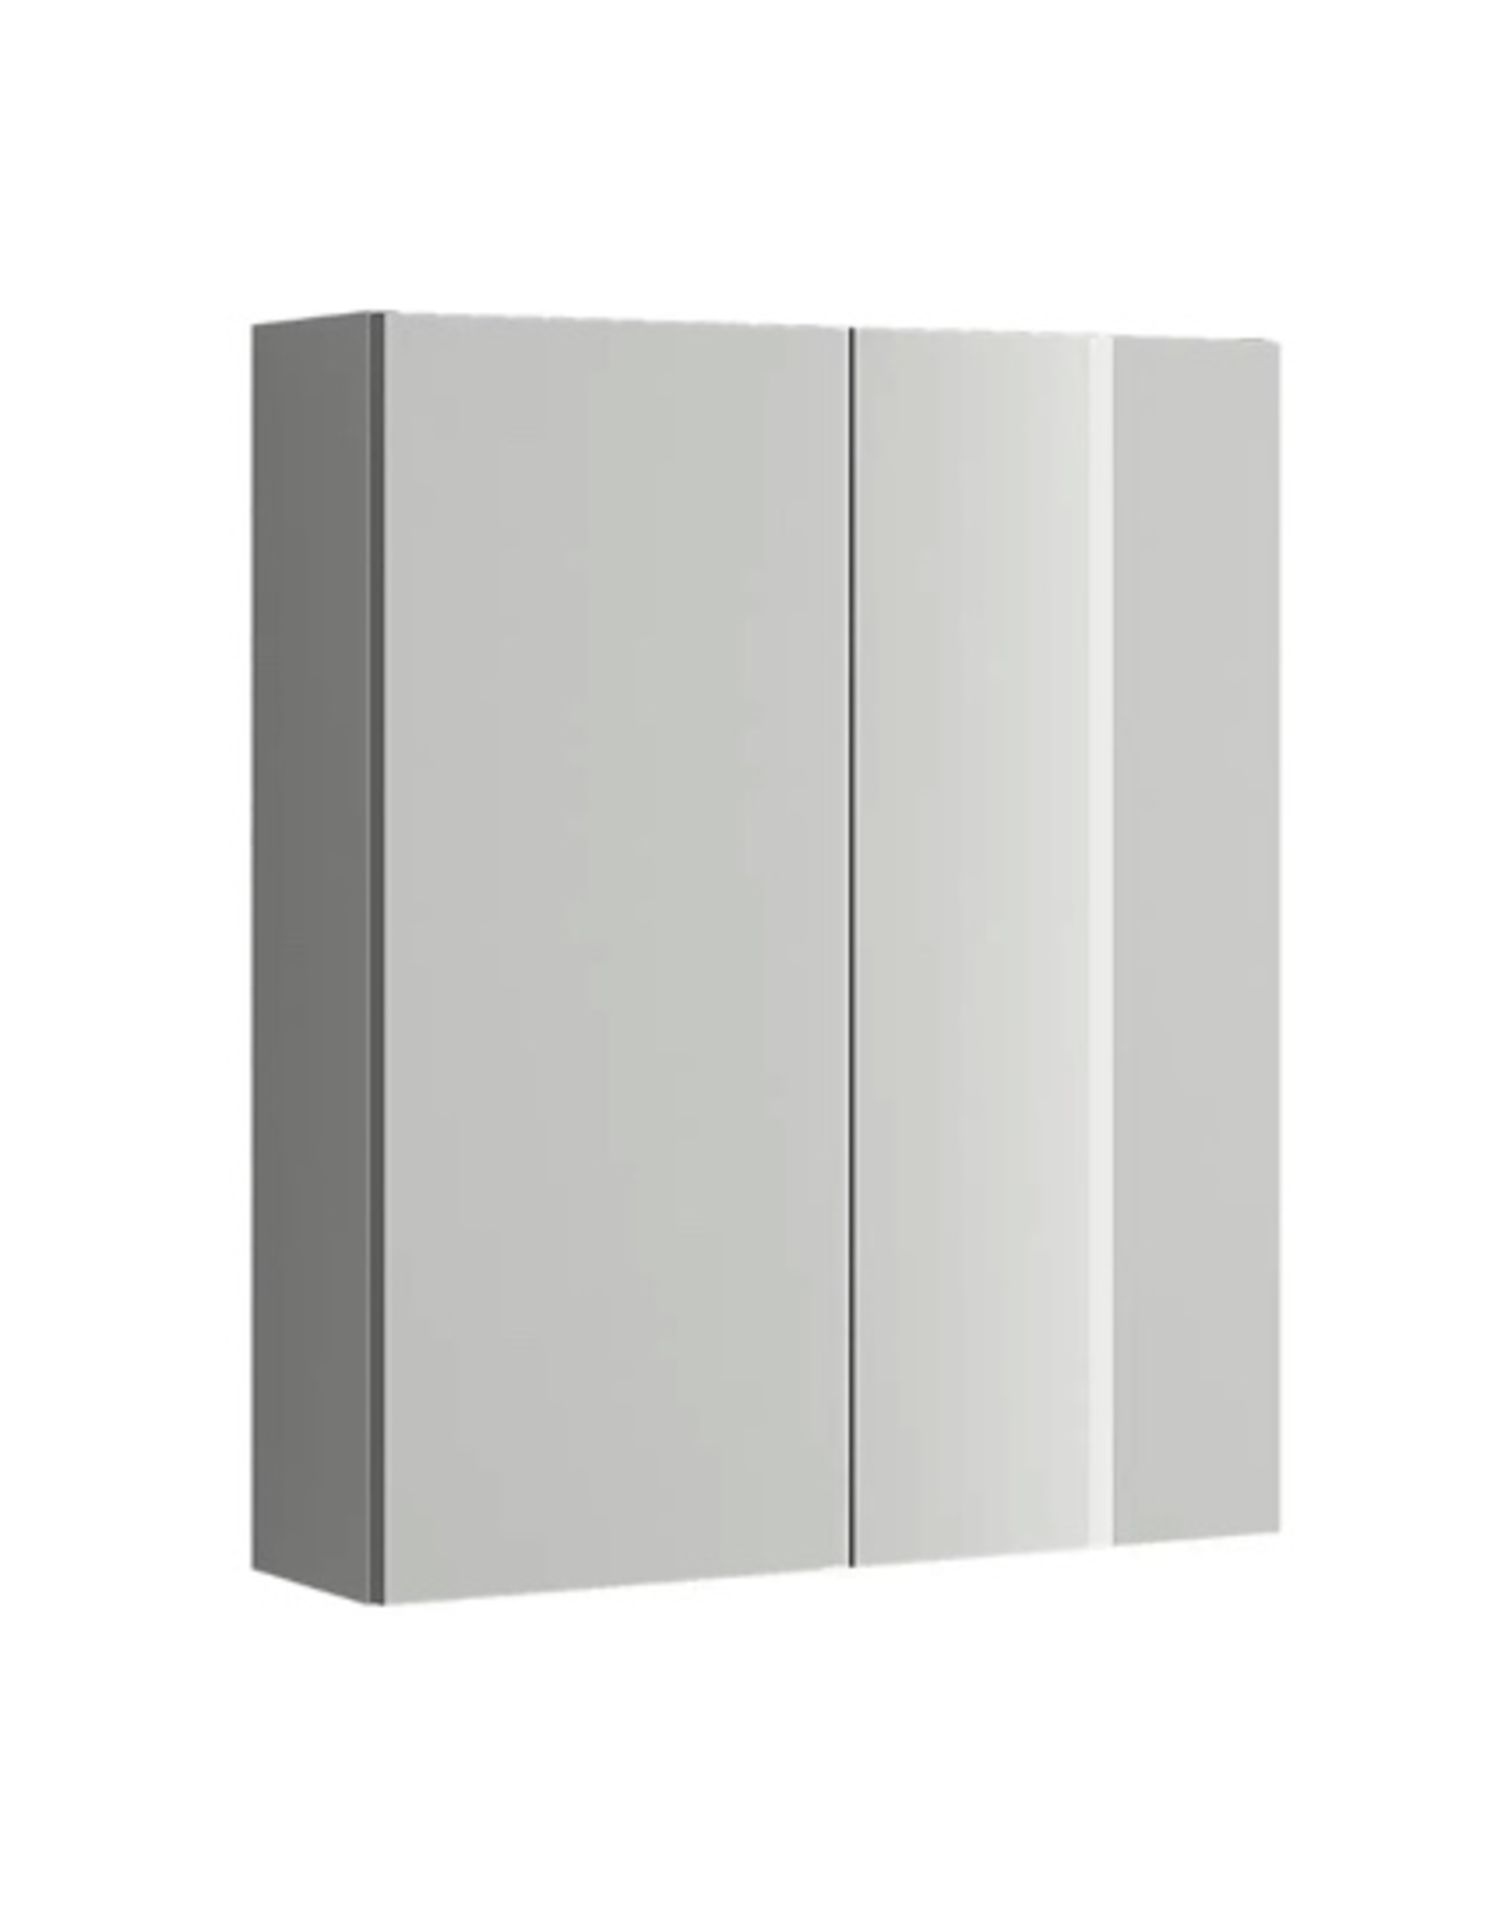 Brand New Boxed House Beautiful ele-ment(s) Bathroom Mirror Cabinet 600x720mm RRP £240 **No VAT**